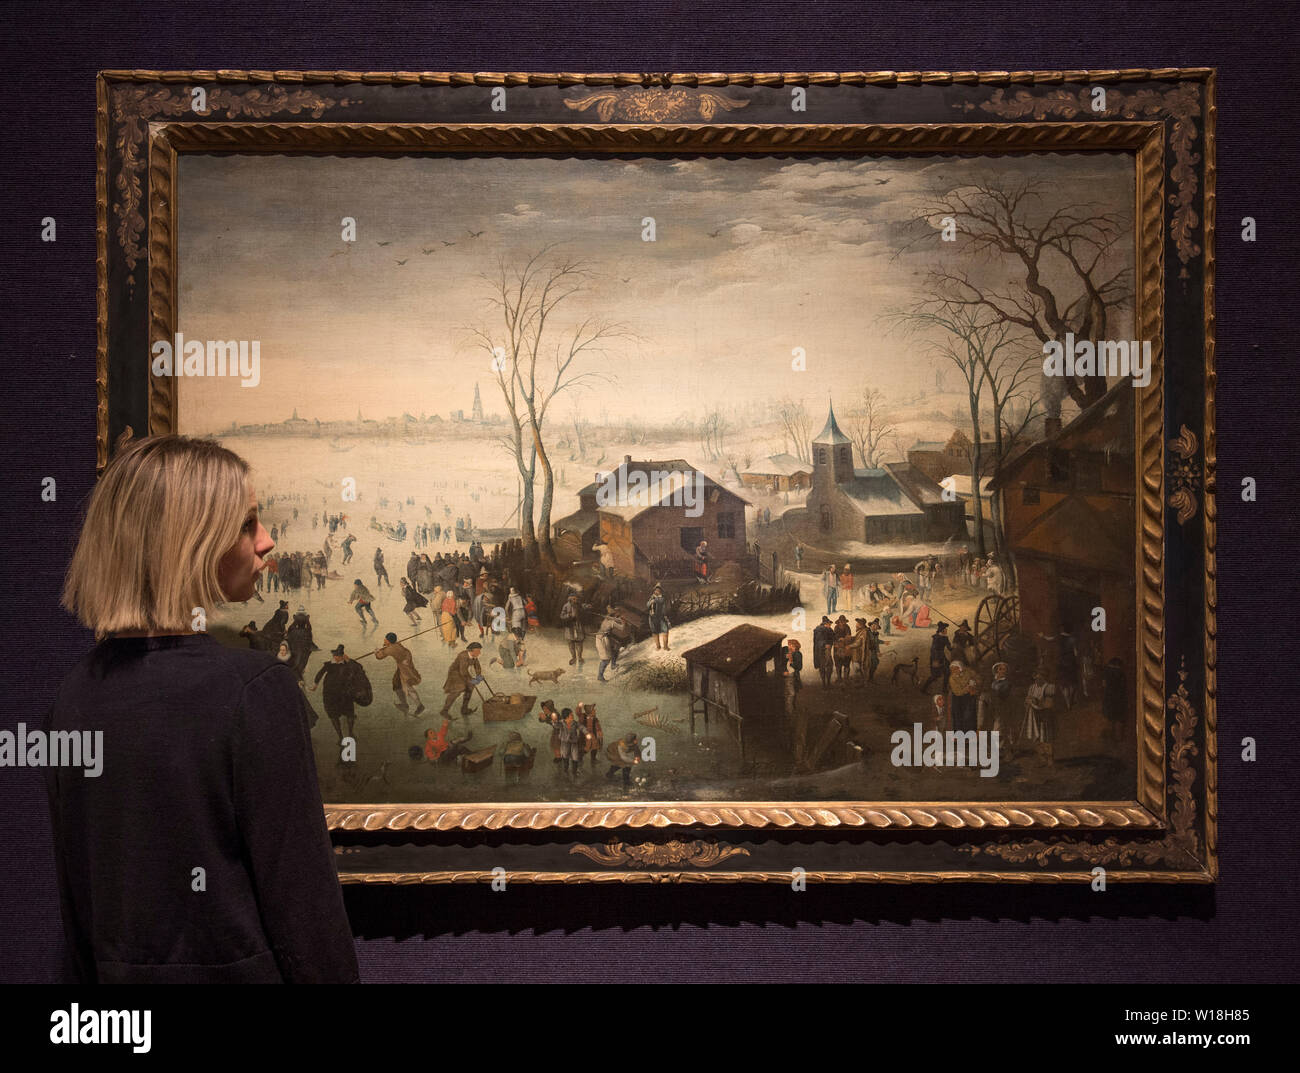 Bonhams, London, UK. 1st July 2019. Works by Brueghel, Constable and de Ribera on display in the Old Masters sales preview, to be sold on 3 July 2019. Image: Attributed to Jan Wildens, Winter: a landscape with elegant figures skating and boys fighting with snowballs in the foreground, and a view of Antwerp in the distance. Estimate £55,000-75,000. Credit: Malcolm Park/Alamy Live News. Stock Photo